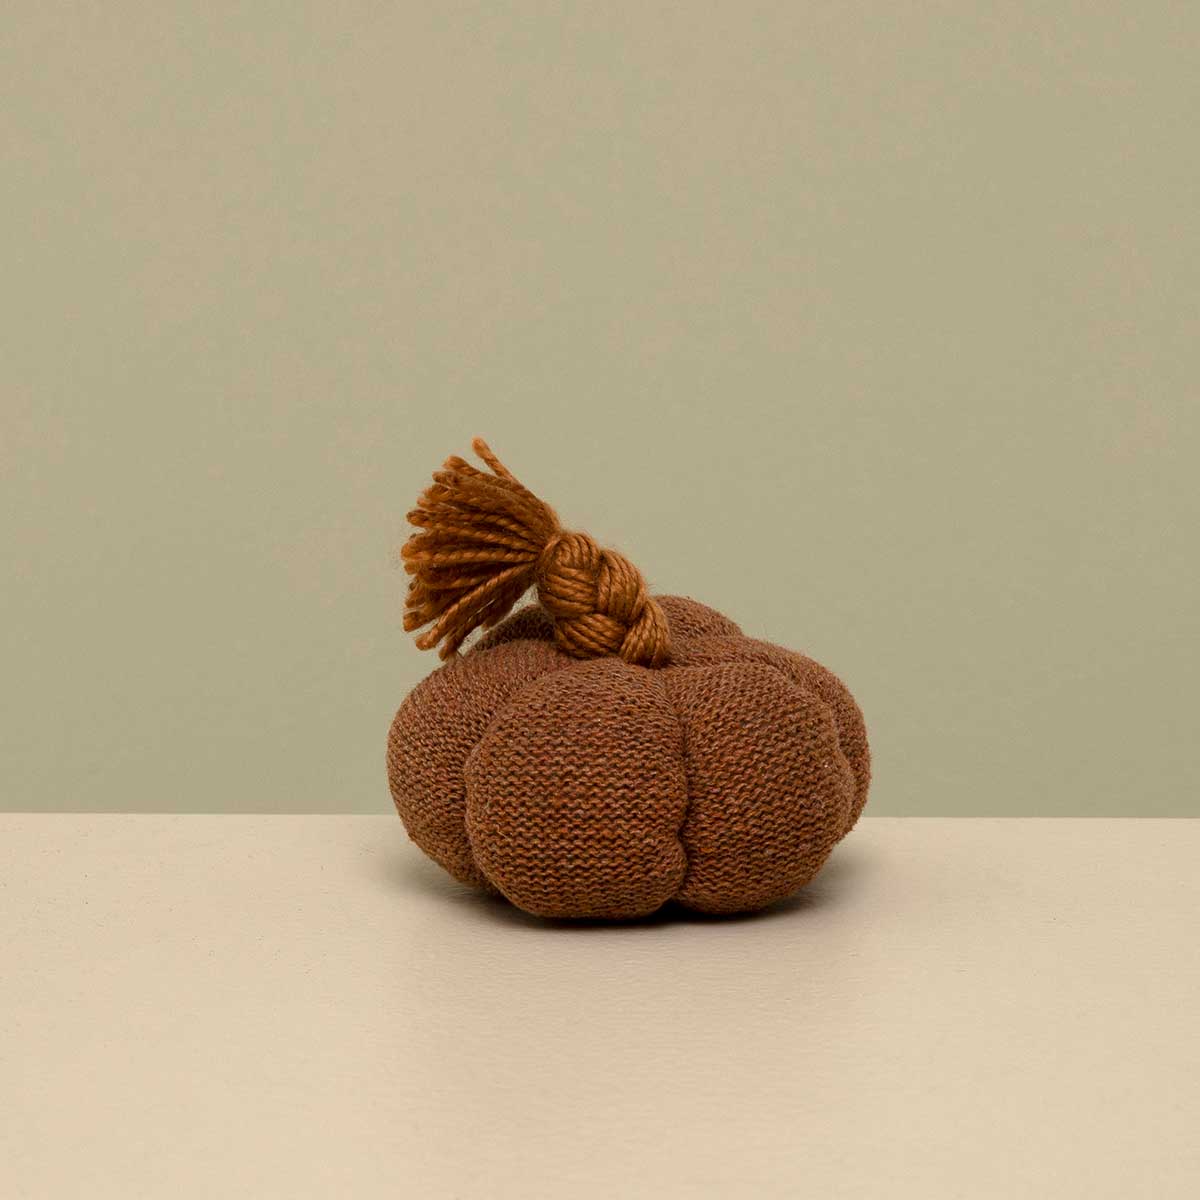 KNIT PUMPKIN PLUSH CLAY WITH BRAIDED STEM SMALL 4"X2.5" - Click Image to Close